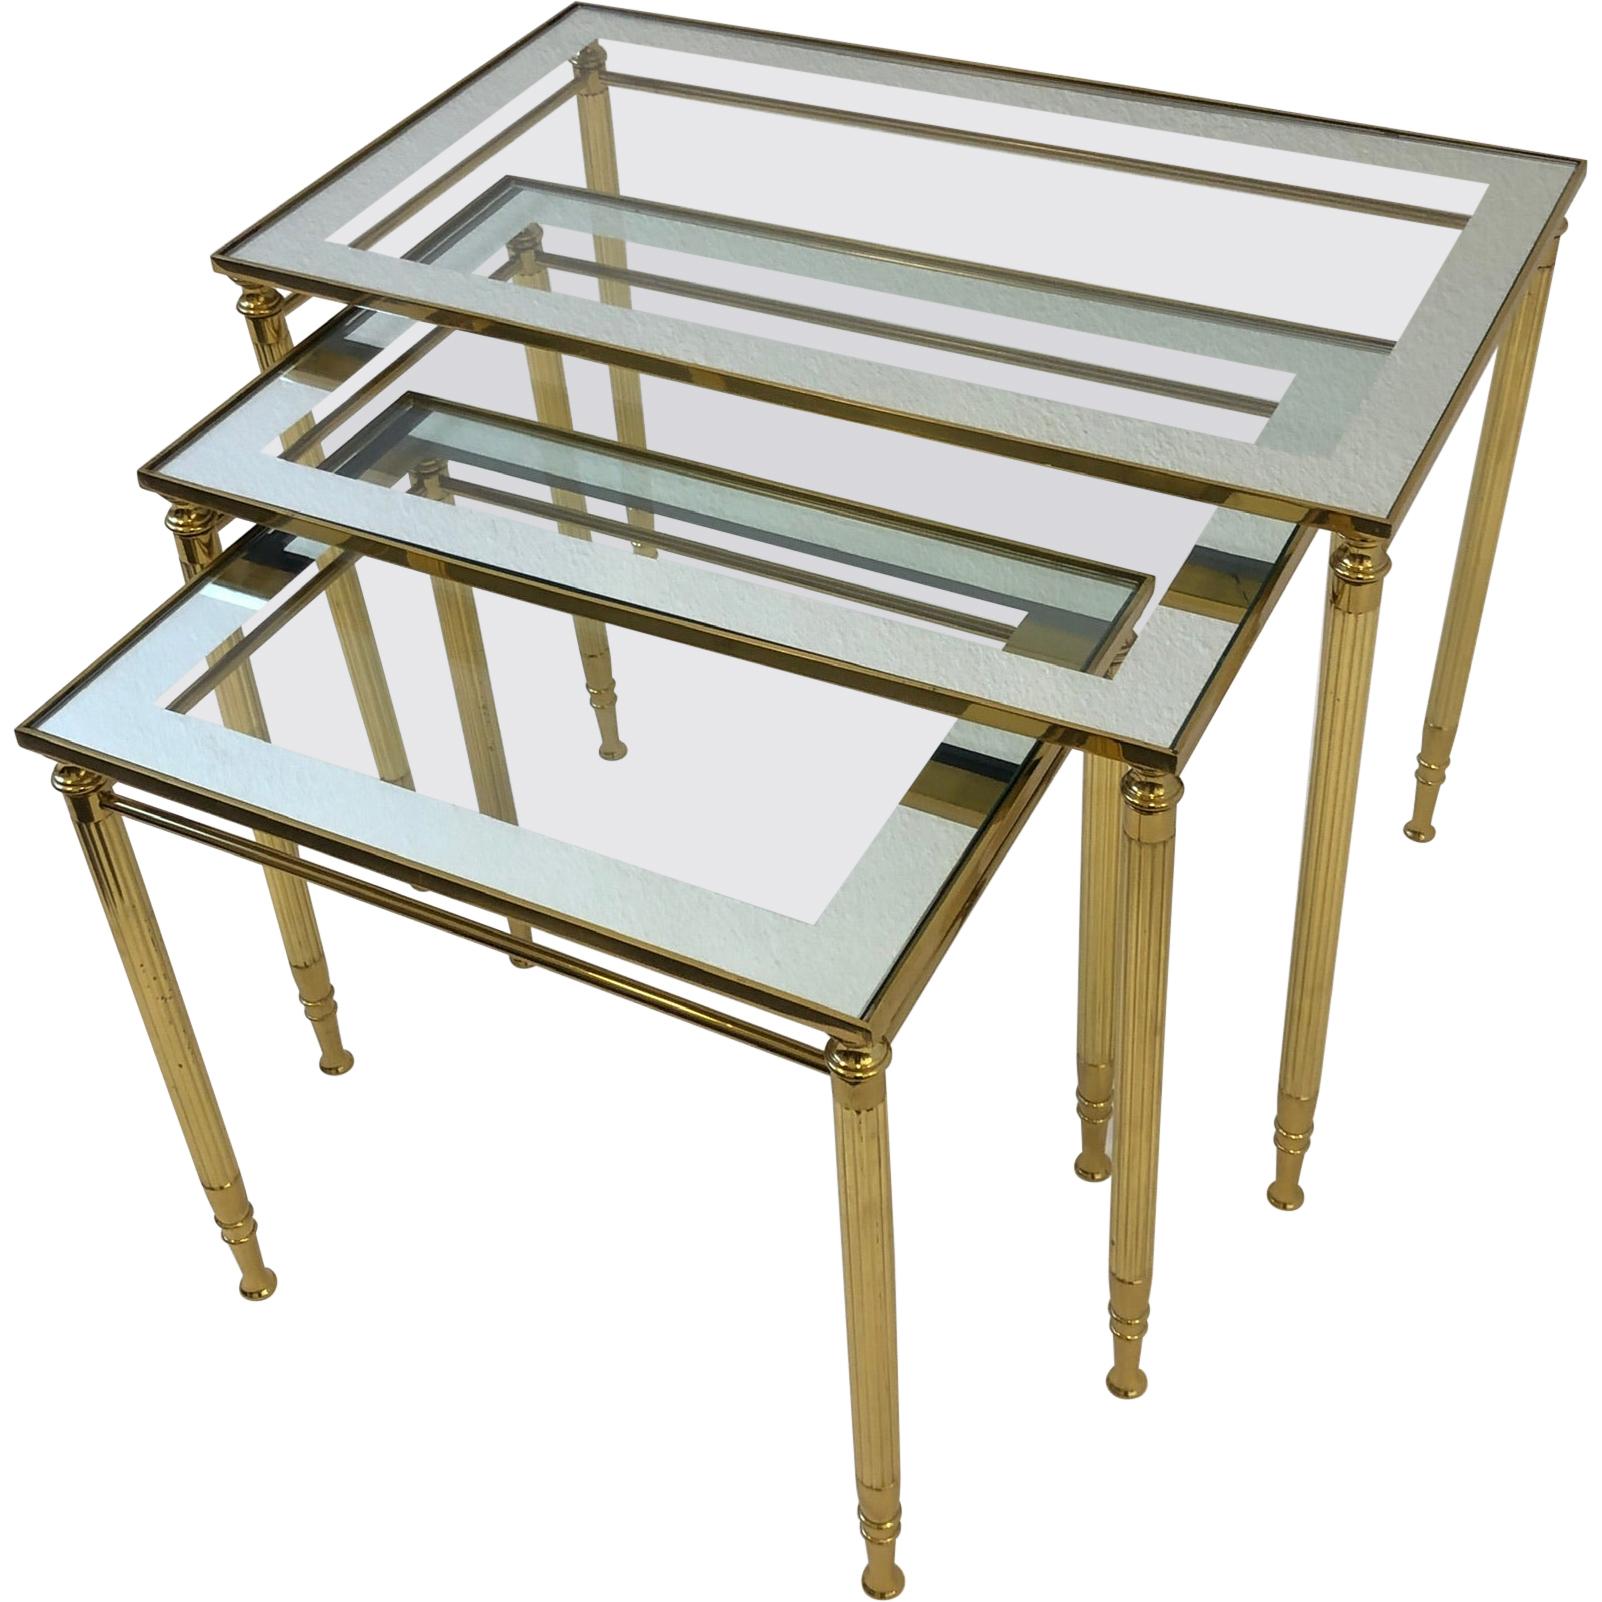 Set of Three Italian Brass and Glass Nesting Tables by Maison Baguès